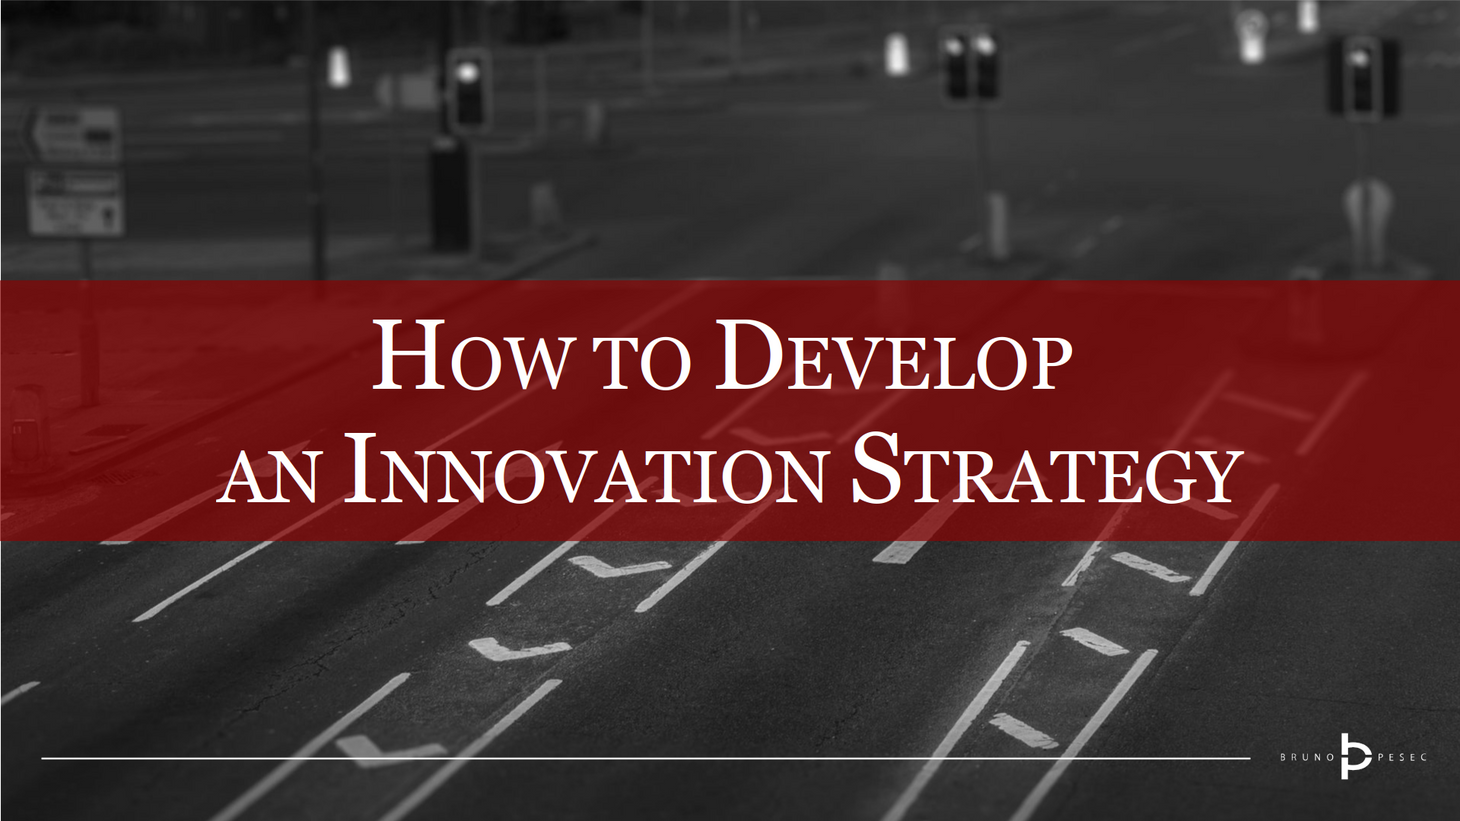 How to develop an innovation strategy